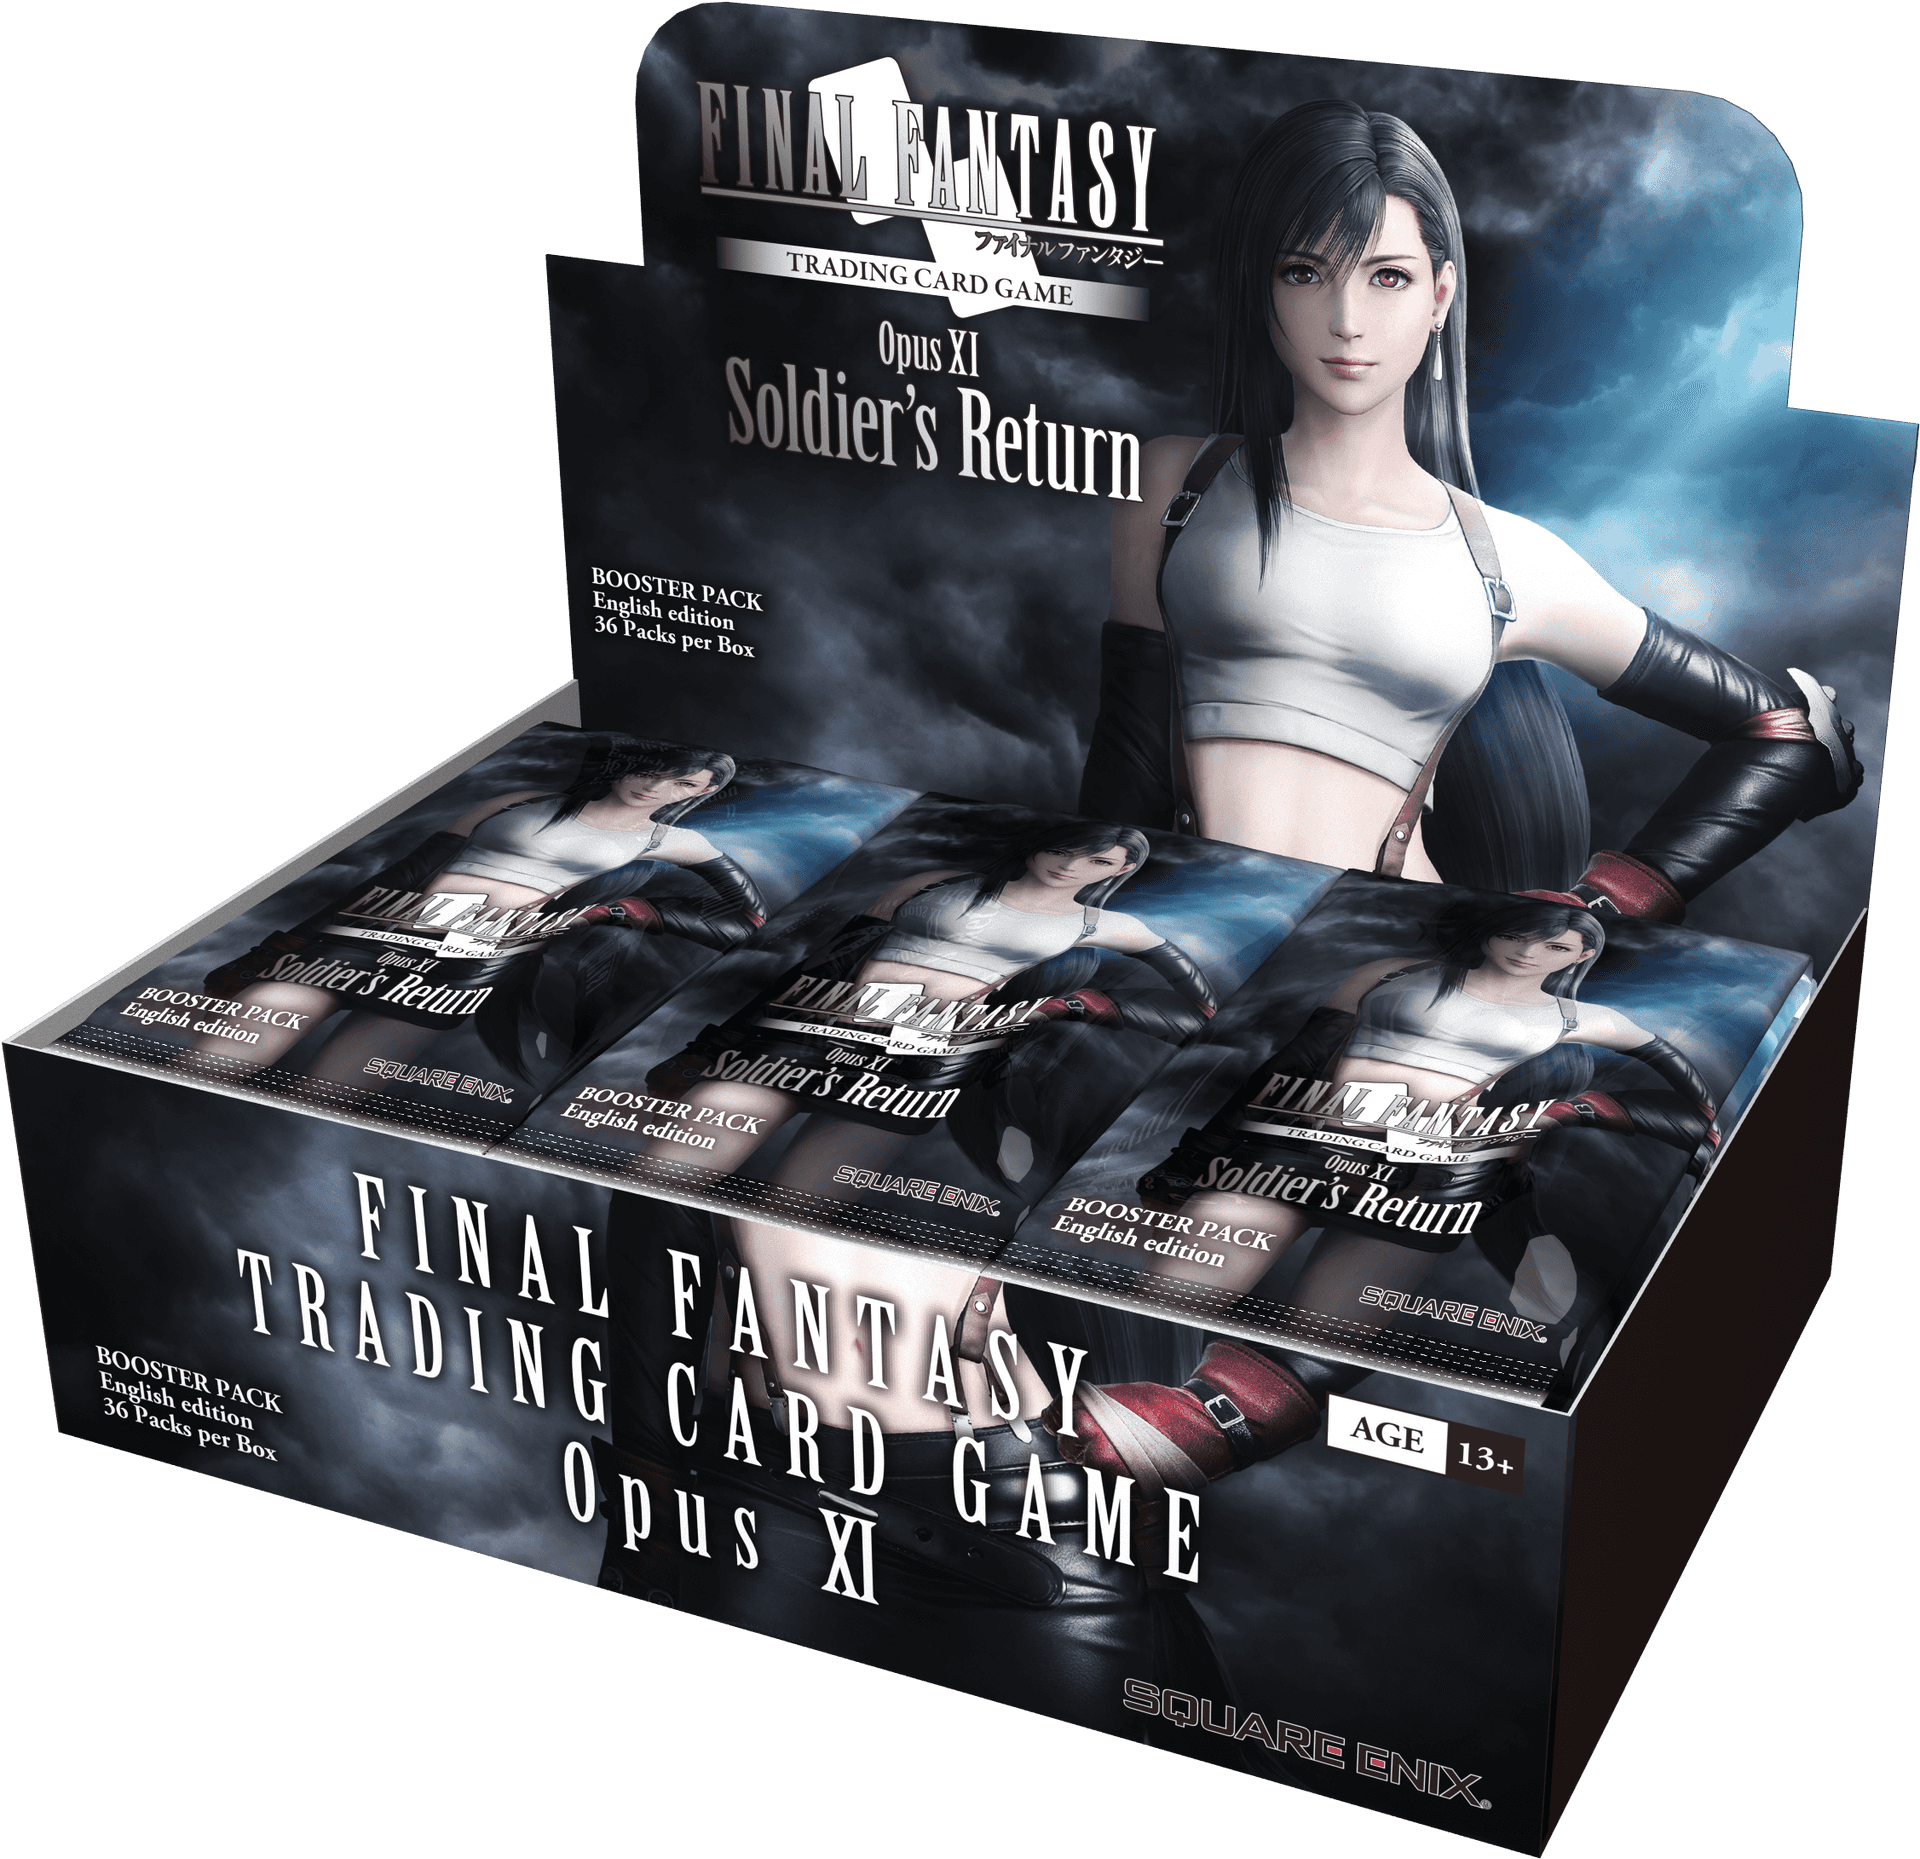 Final Fantasy T C G Opus X I Booster Box PNG